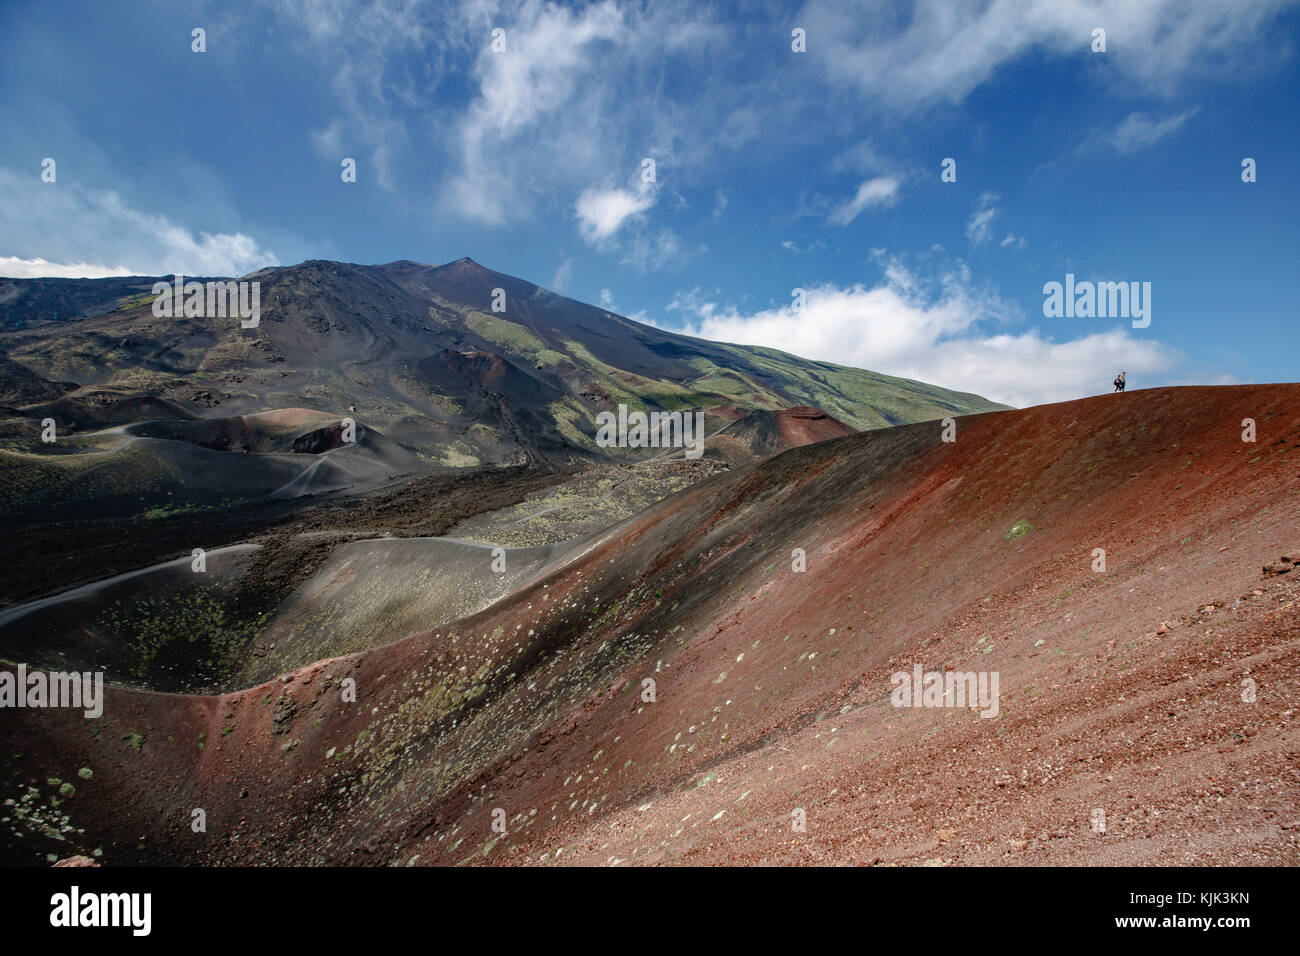 Craters and surroundings of the Etna Volcano Stock Photo